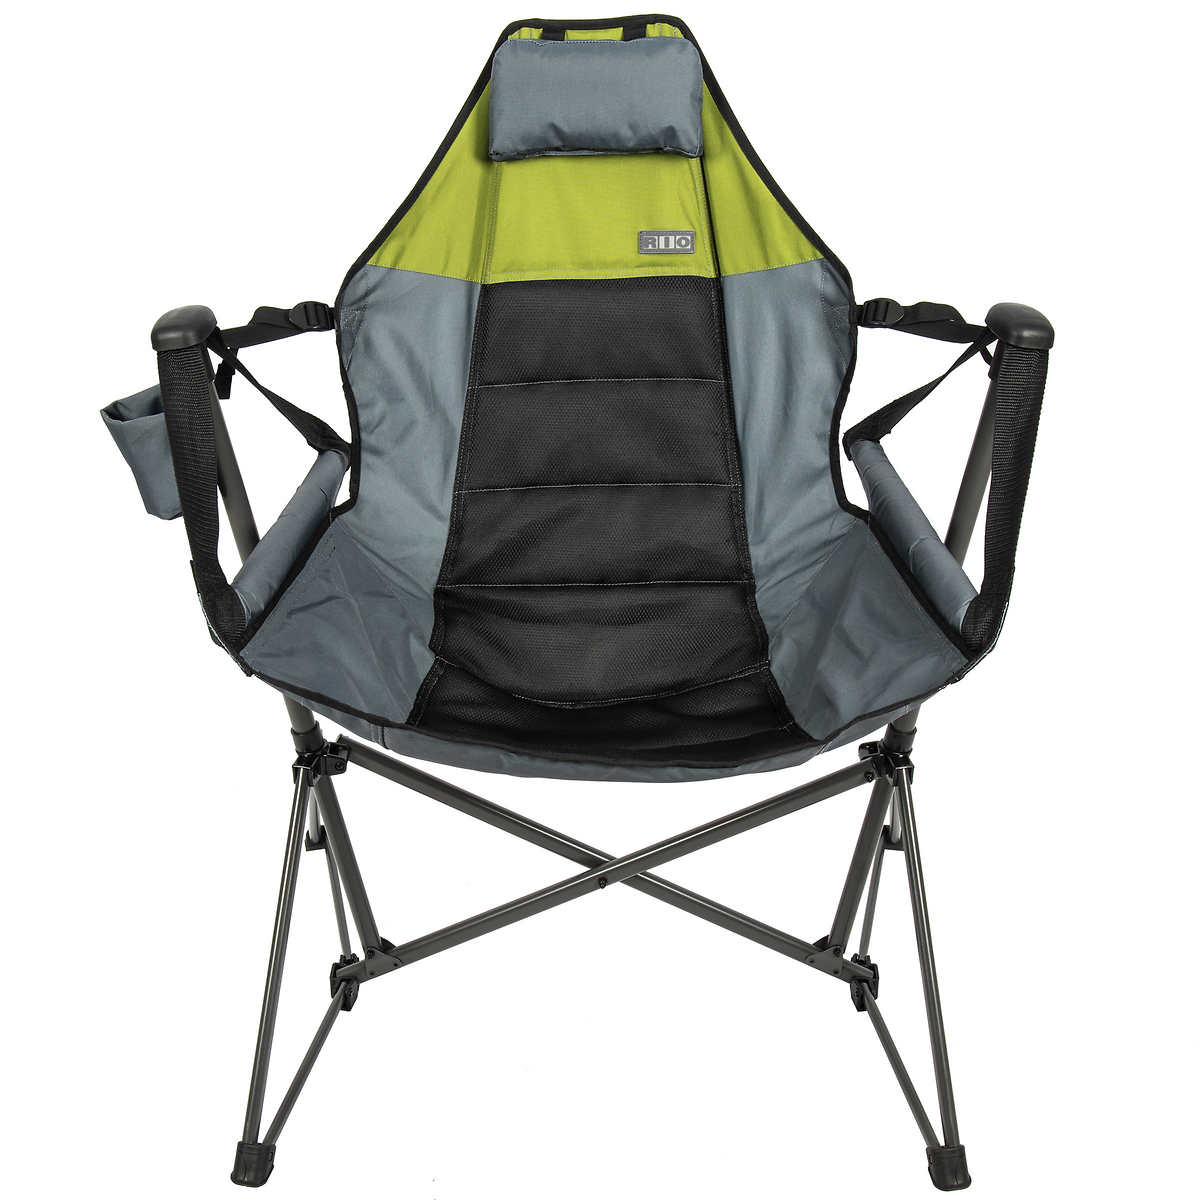 Relaxation: Exploring the Costco Swinging Hammock Chair插图4